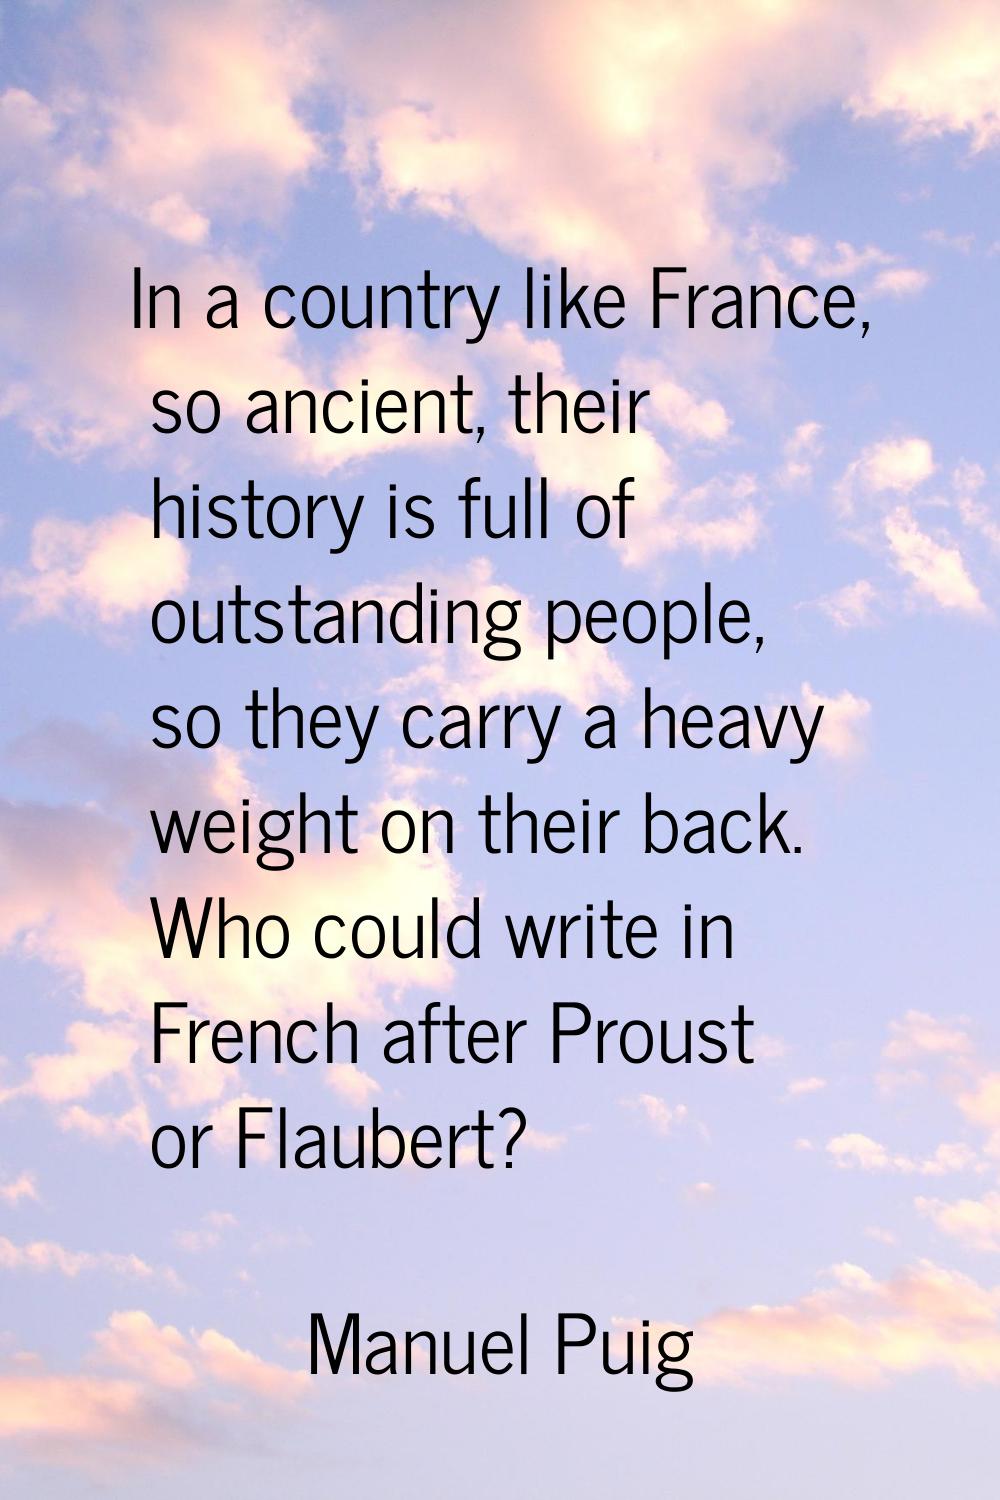 In a country like France, so ancient, their history is full of outstanding people, so they carry a 